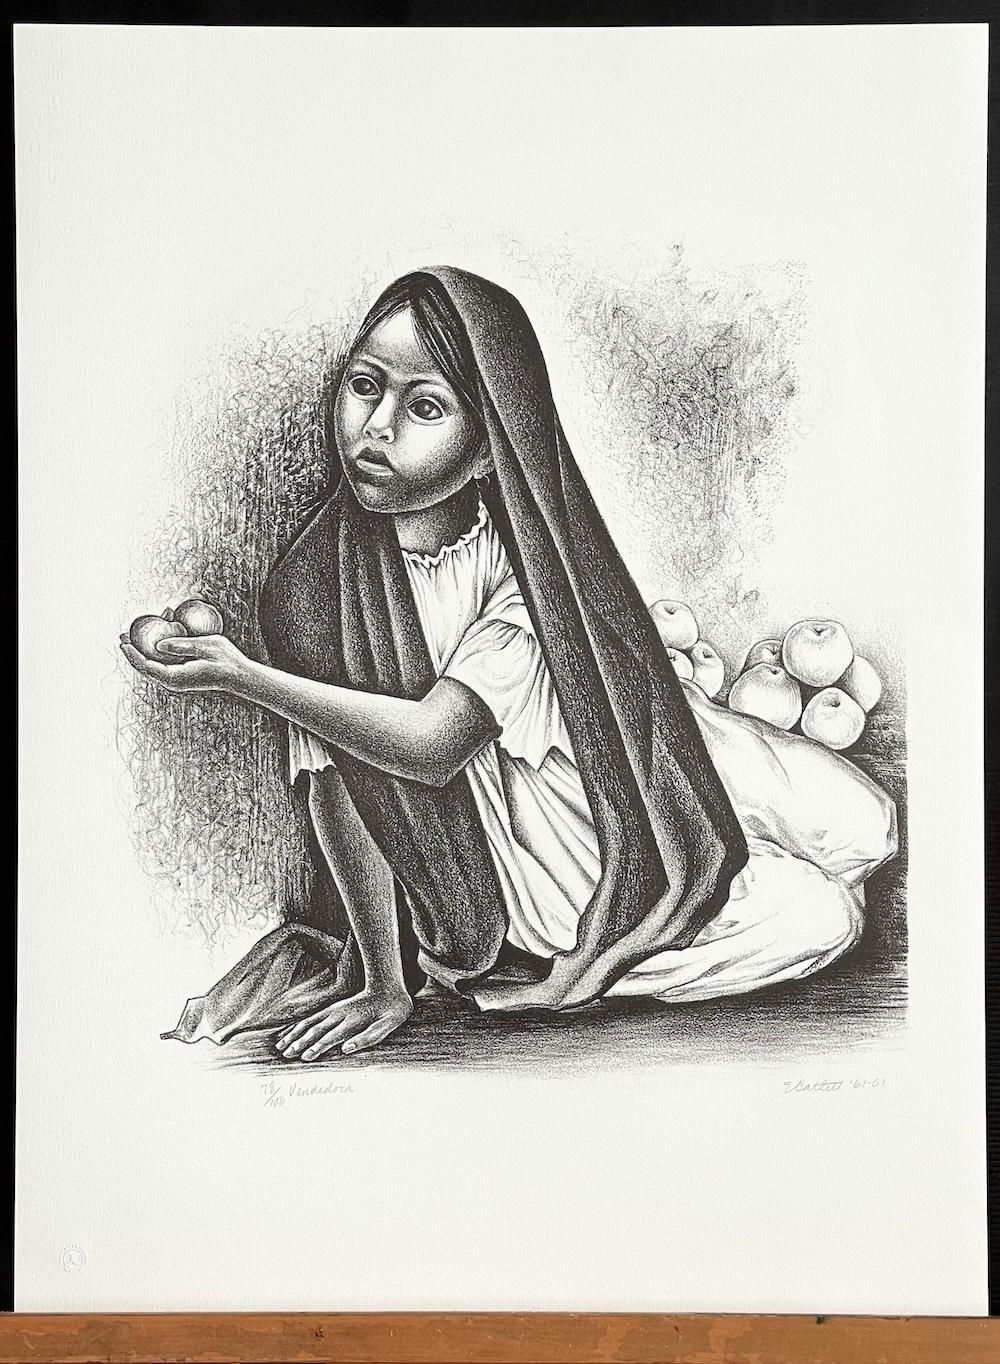 VENDEDORA, a limited edition lithograph by the renowned American-born Mexican sculptor and printmaker Elizabeth Catlett(b.1915–2012) depicts a sensitive black and white portrait of a young Mexican village girl selling fruit. Printed in black ink on